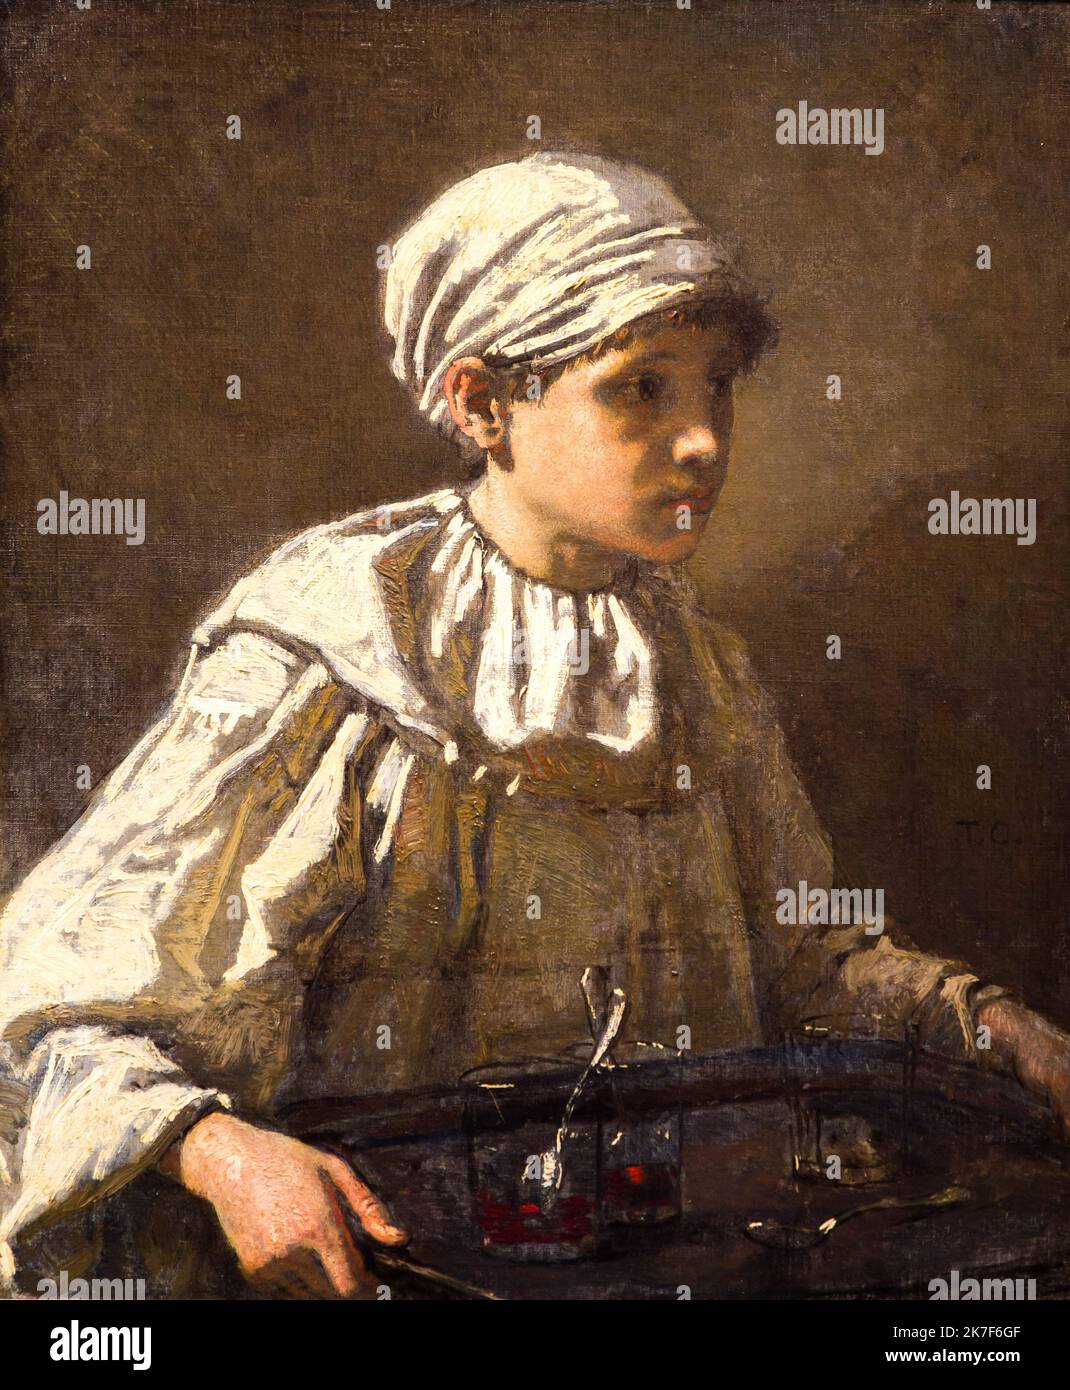 ©Active Museu/MAXPPP - ActiveMuseum 0001512.jpg / Le Petit Patissier, 1878 - Thomas Couture 1878 - / Thomas Couture / Peinture Active Museum / Le Pictorium Chef's hat ,Child ,Glass ,Learning ,Pastry cook ,Realism ,Spoon ,Tray ,Vertical ,Young boy ,19th century ,Thomas Couture ,Painting ,  Stock Photo